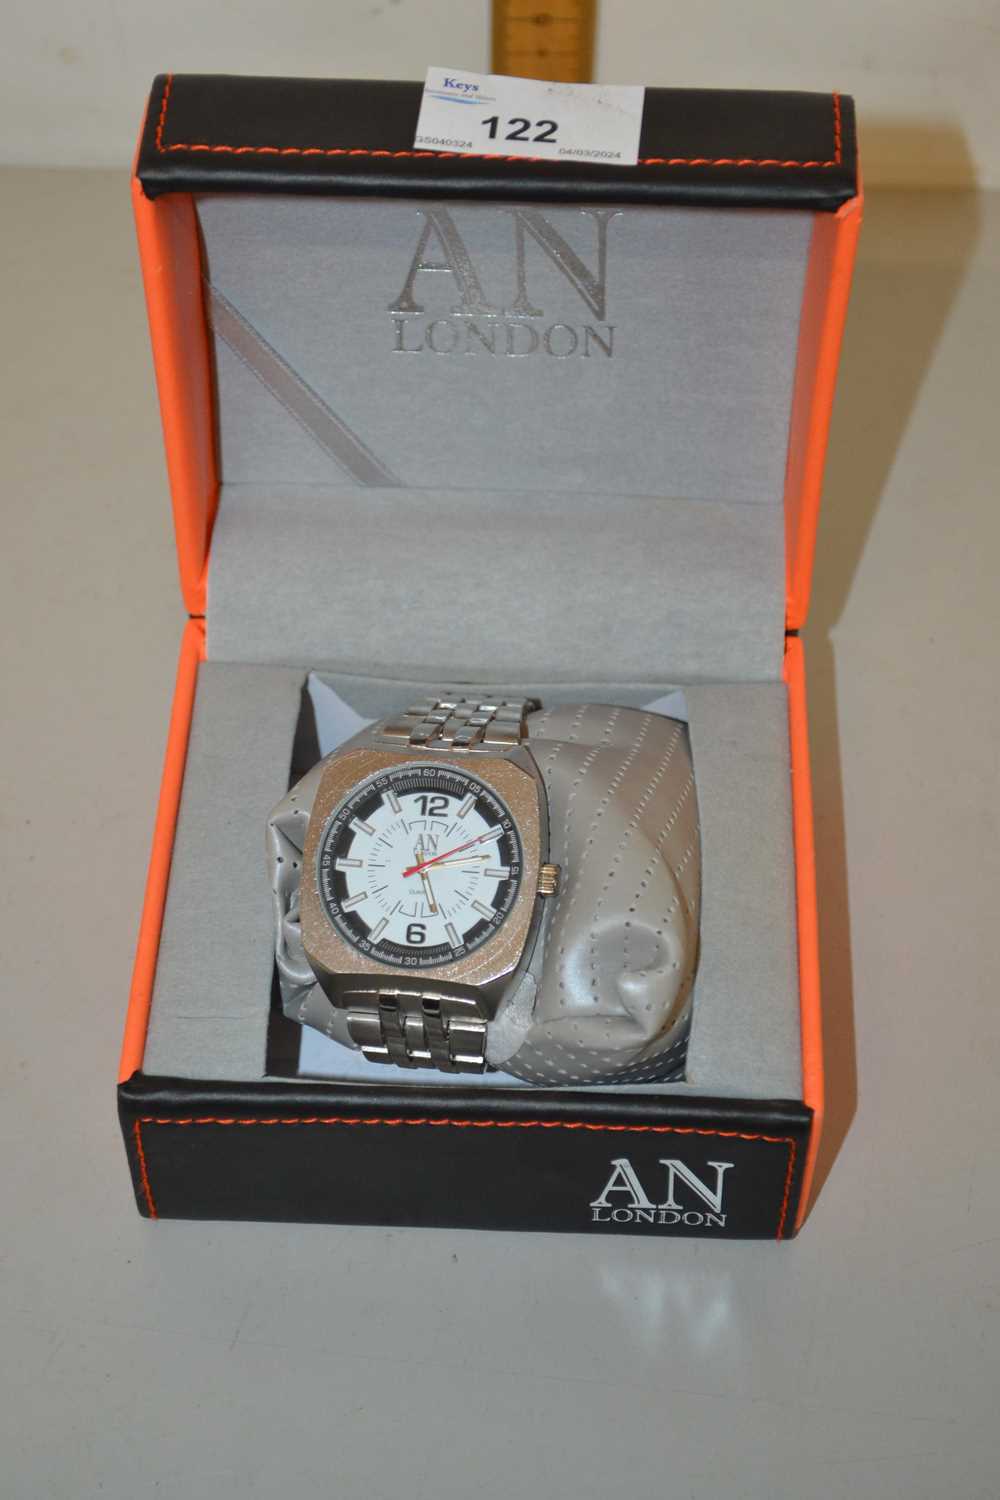 An AN London gents wristwatch with box